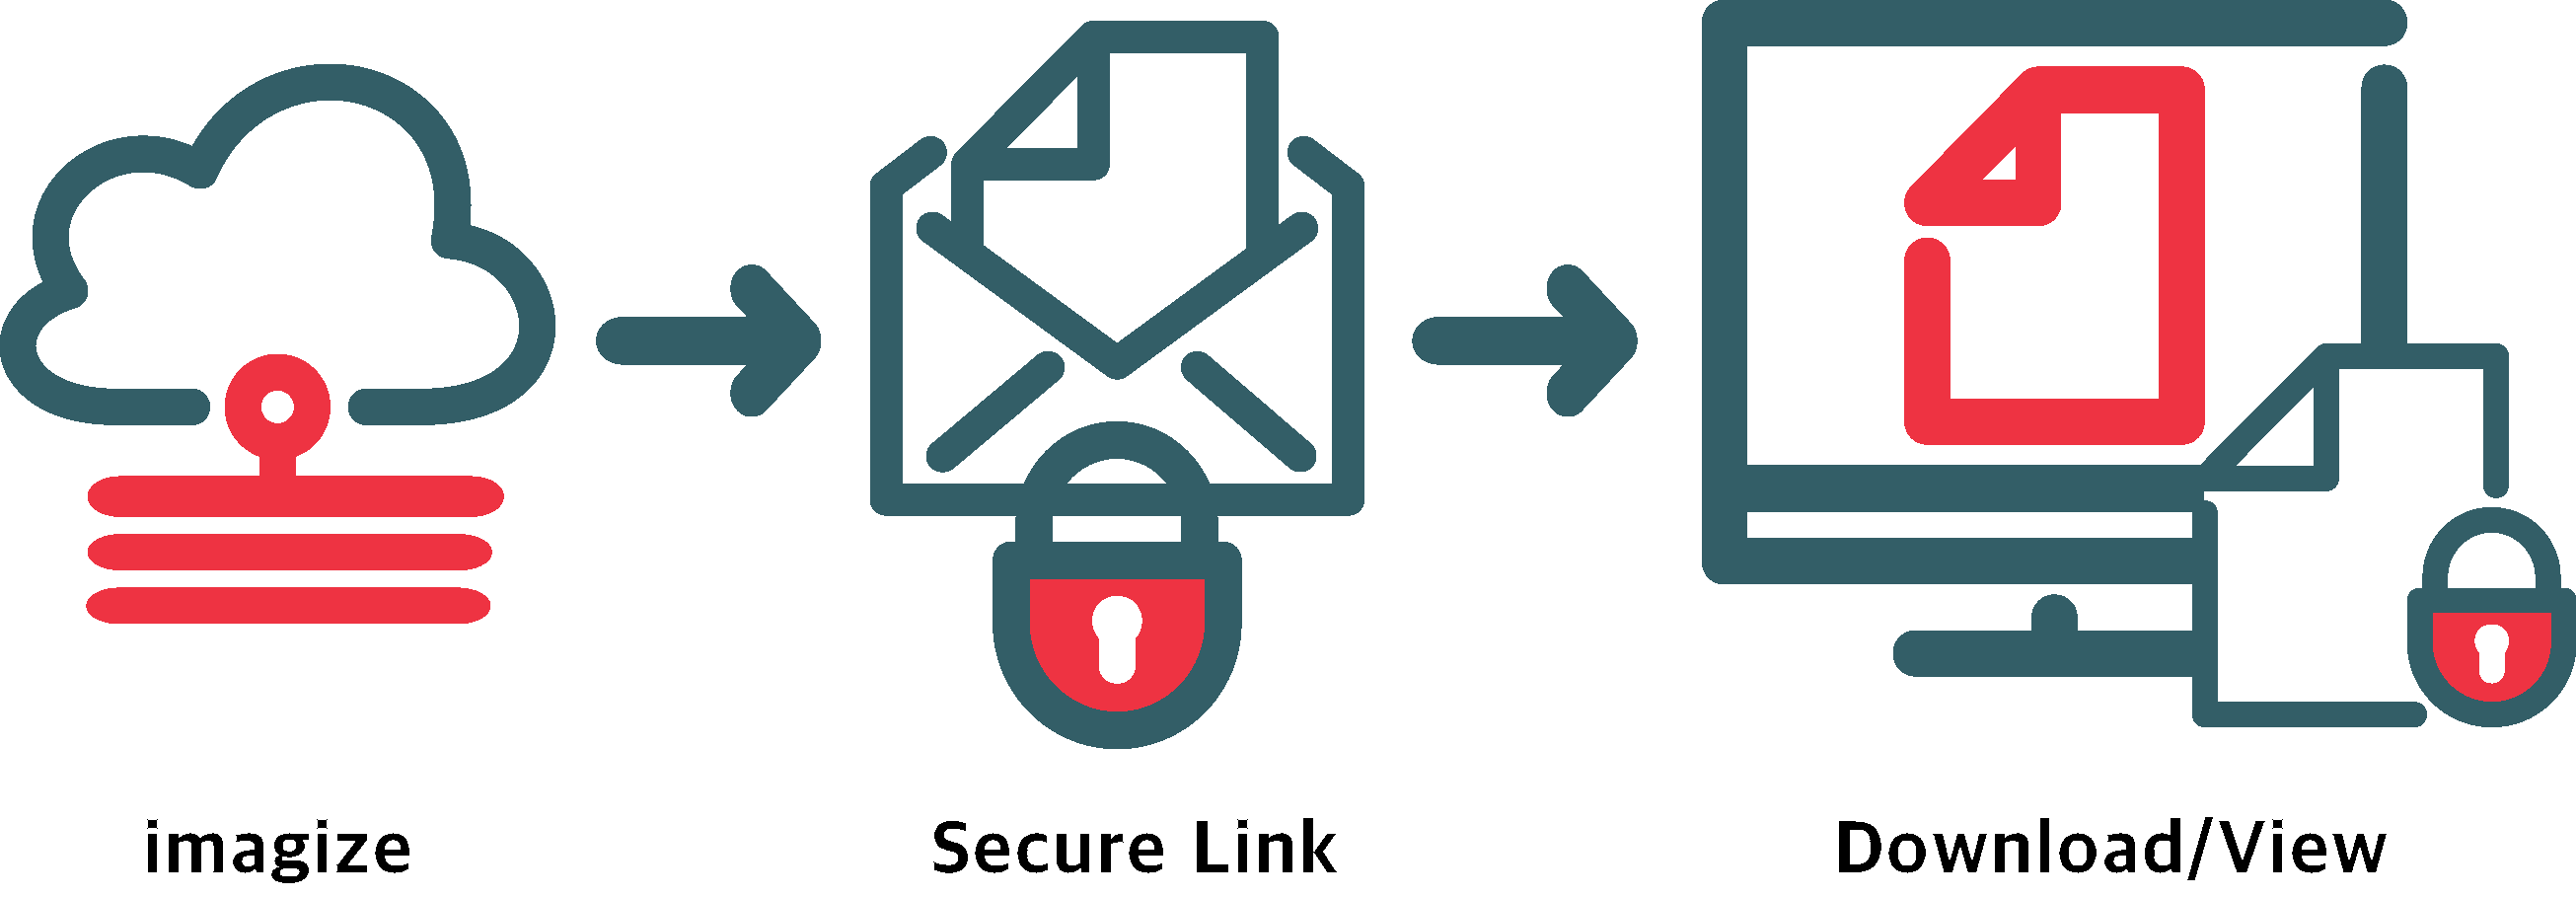 imagize features - Secure Document Link